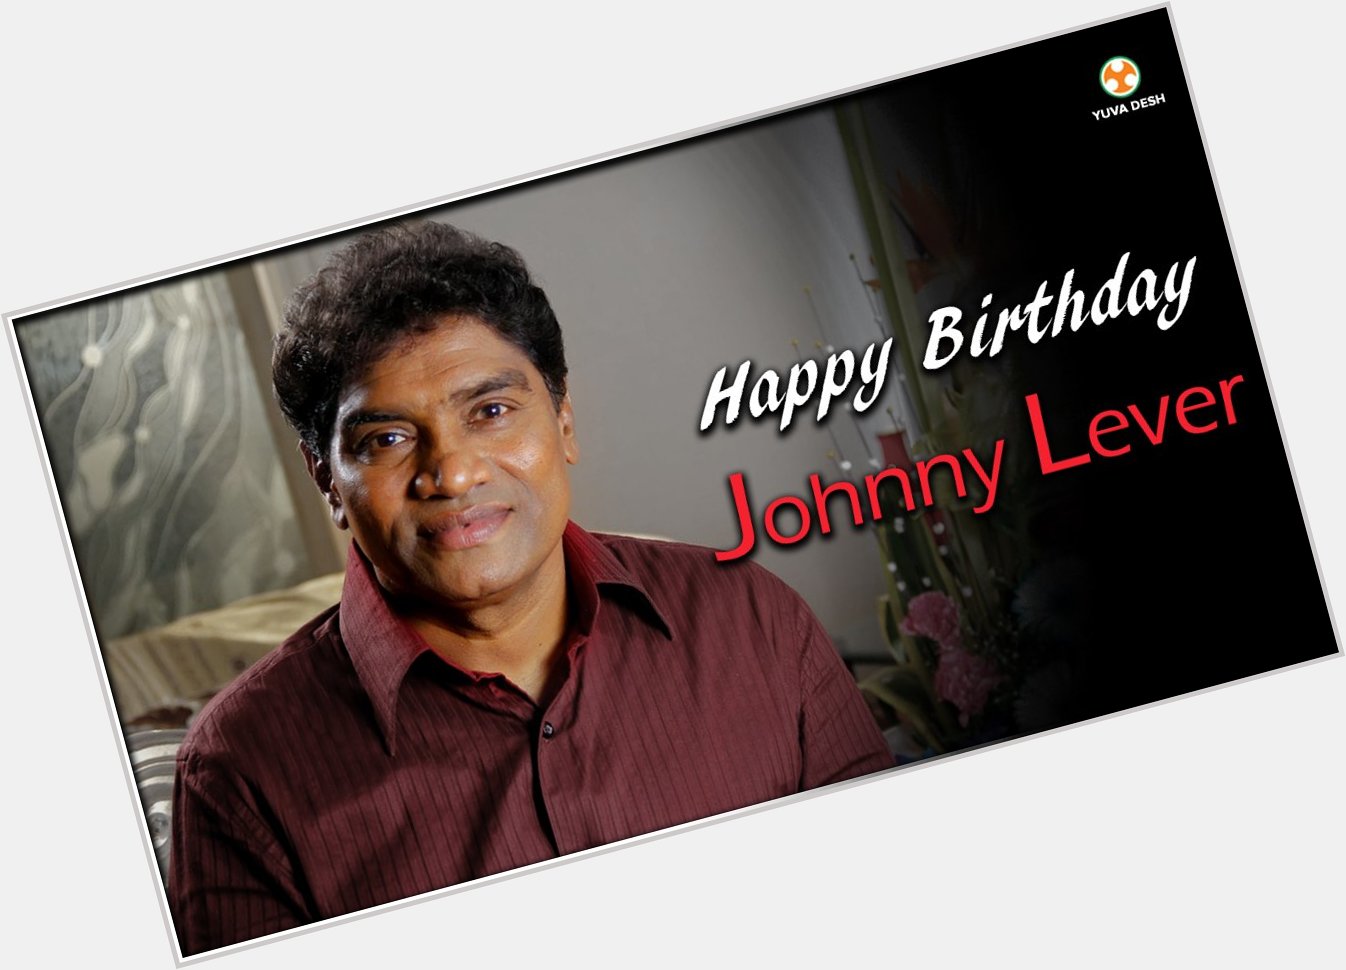 Wishing Johnny Lever, one of the best comedians of Hindi cinema, a very happy birthday. 